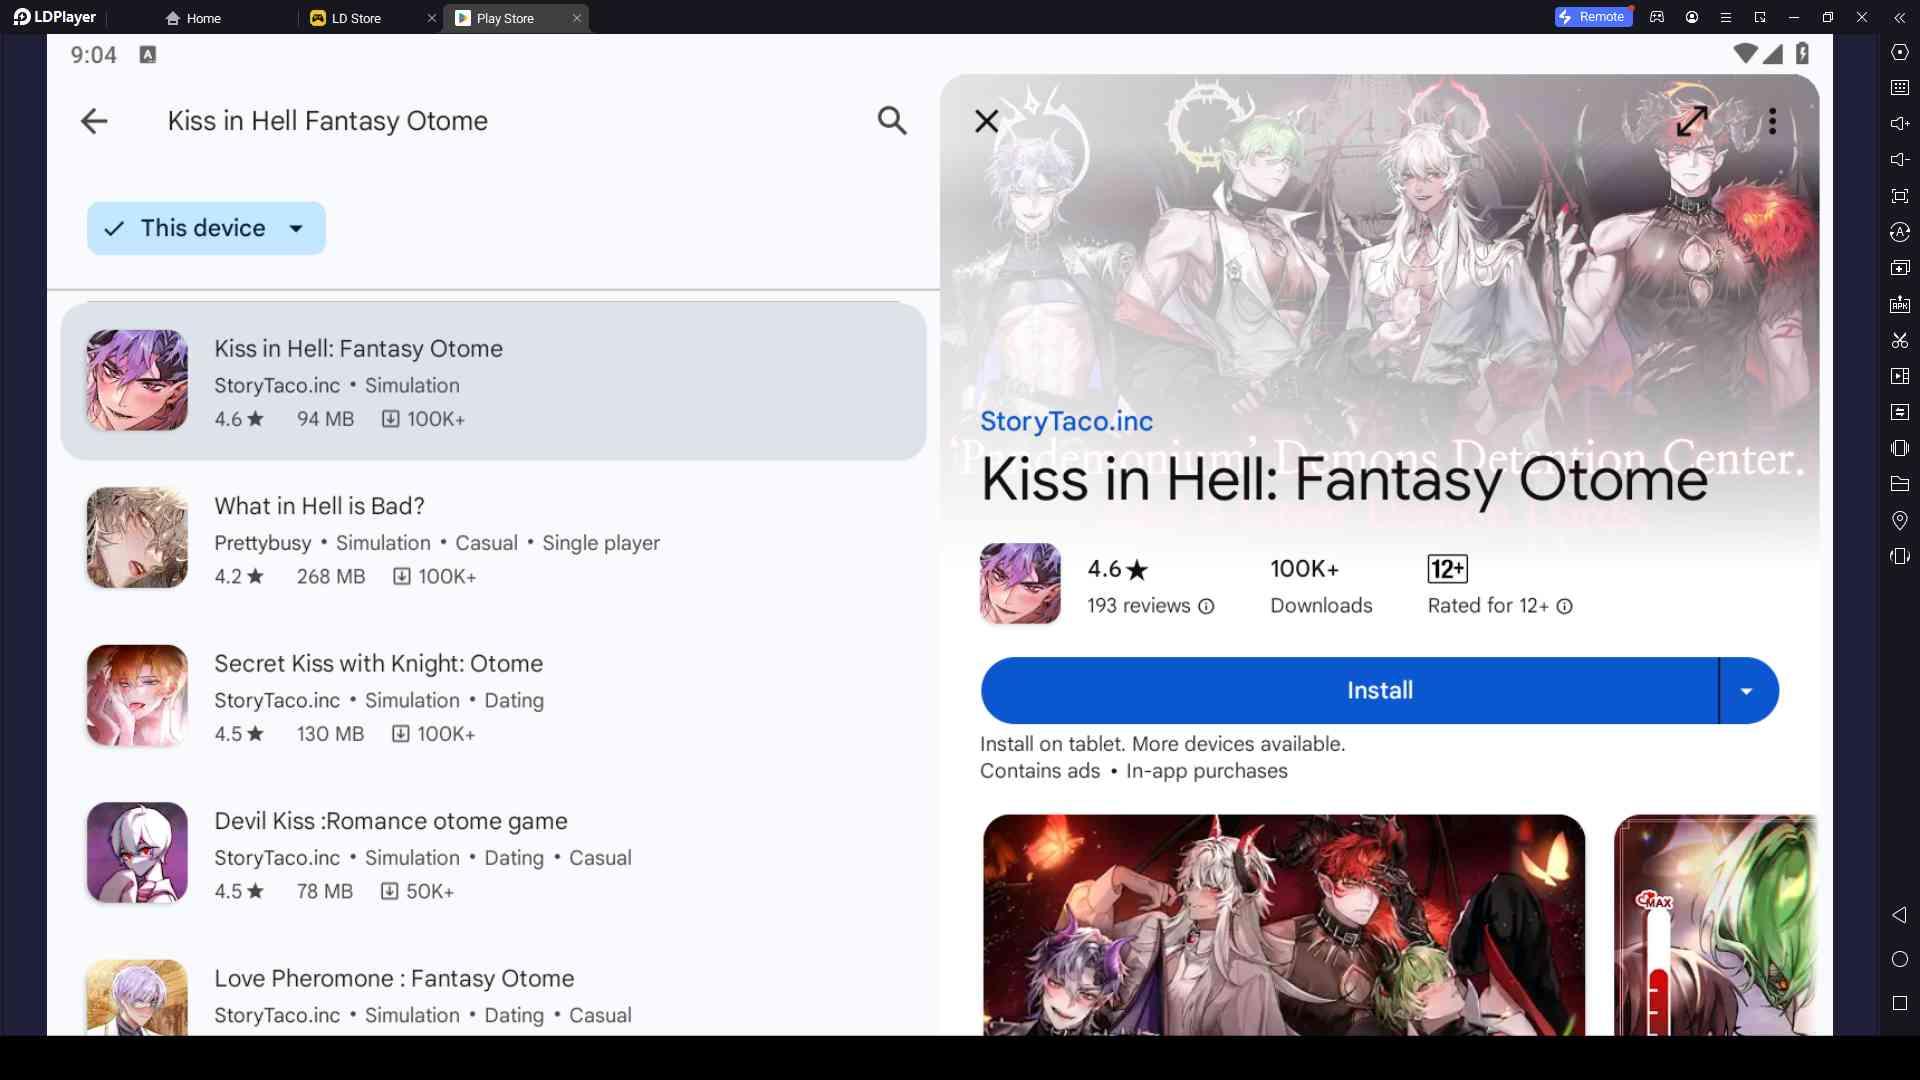 Playing Kiss in Hell Fantasy Otome on LDPlayer